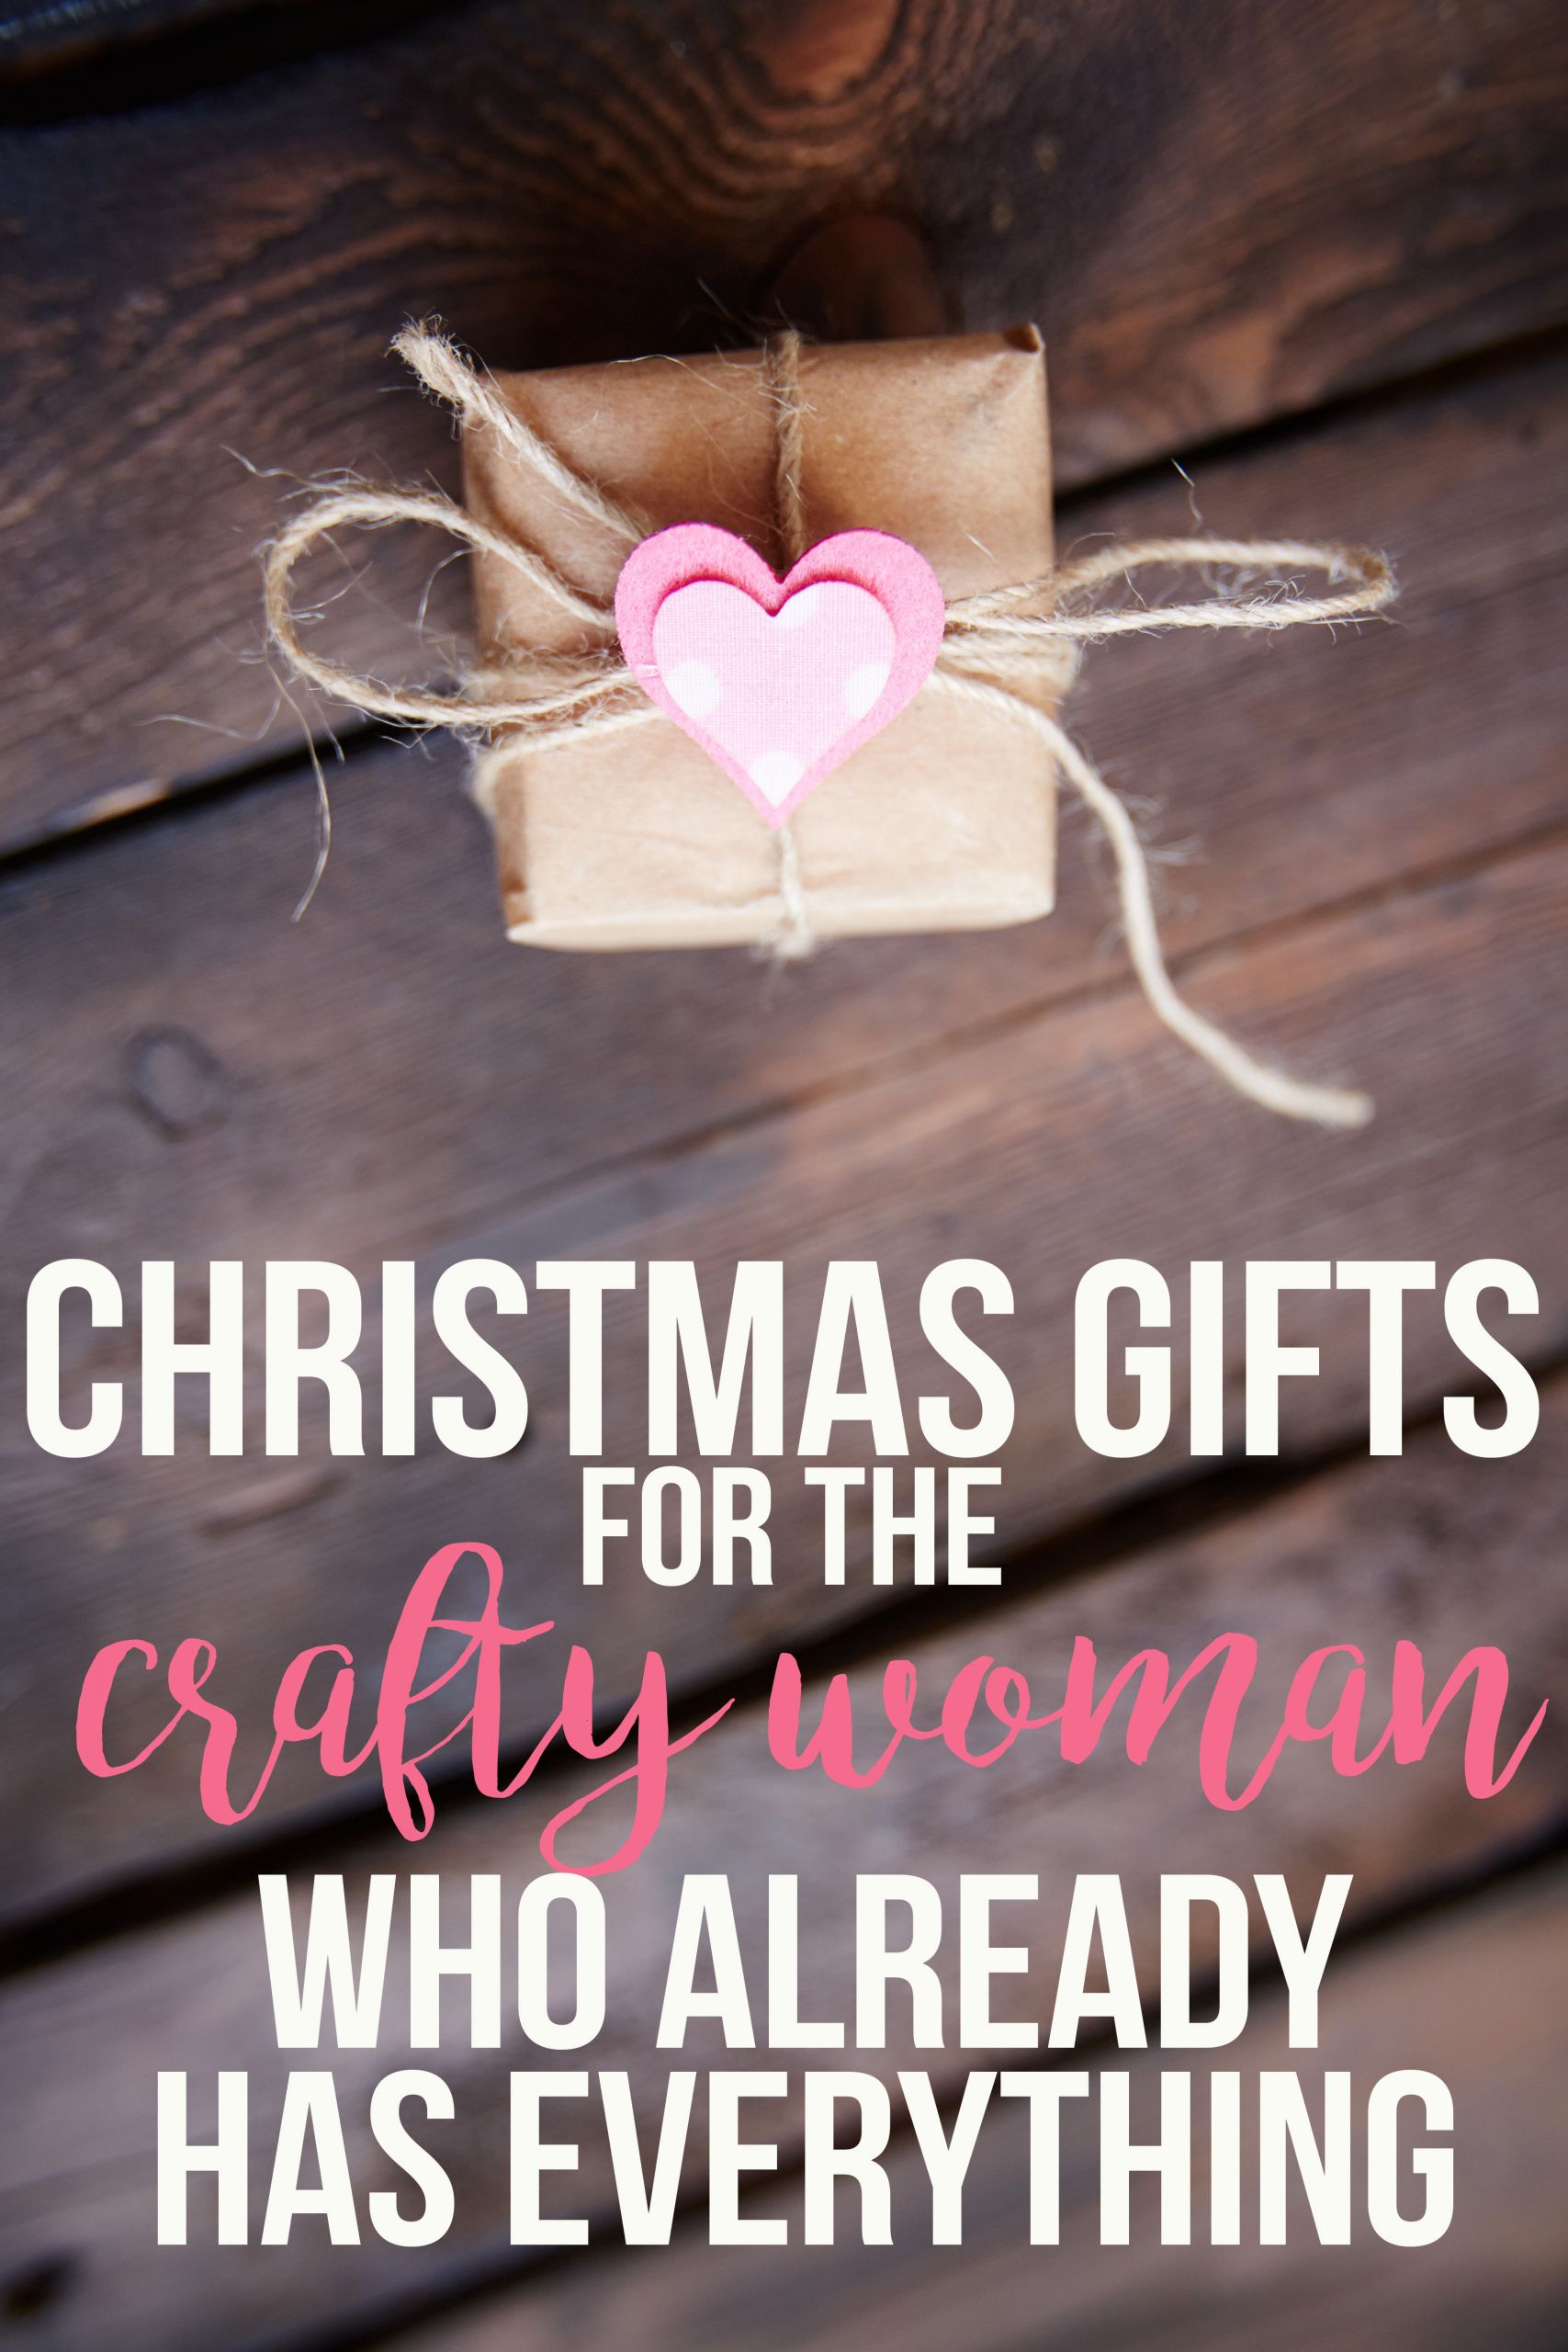 Christmas Gift For Mum Who Has Everything
 Christmas Gifts For The Crafty Woman Who Has Everything